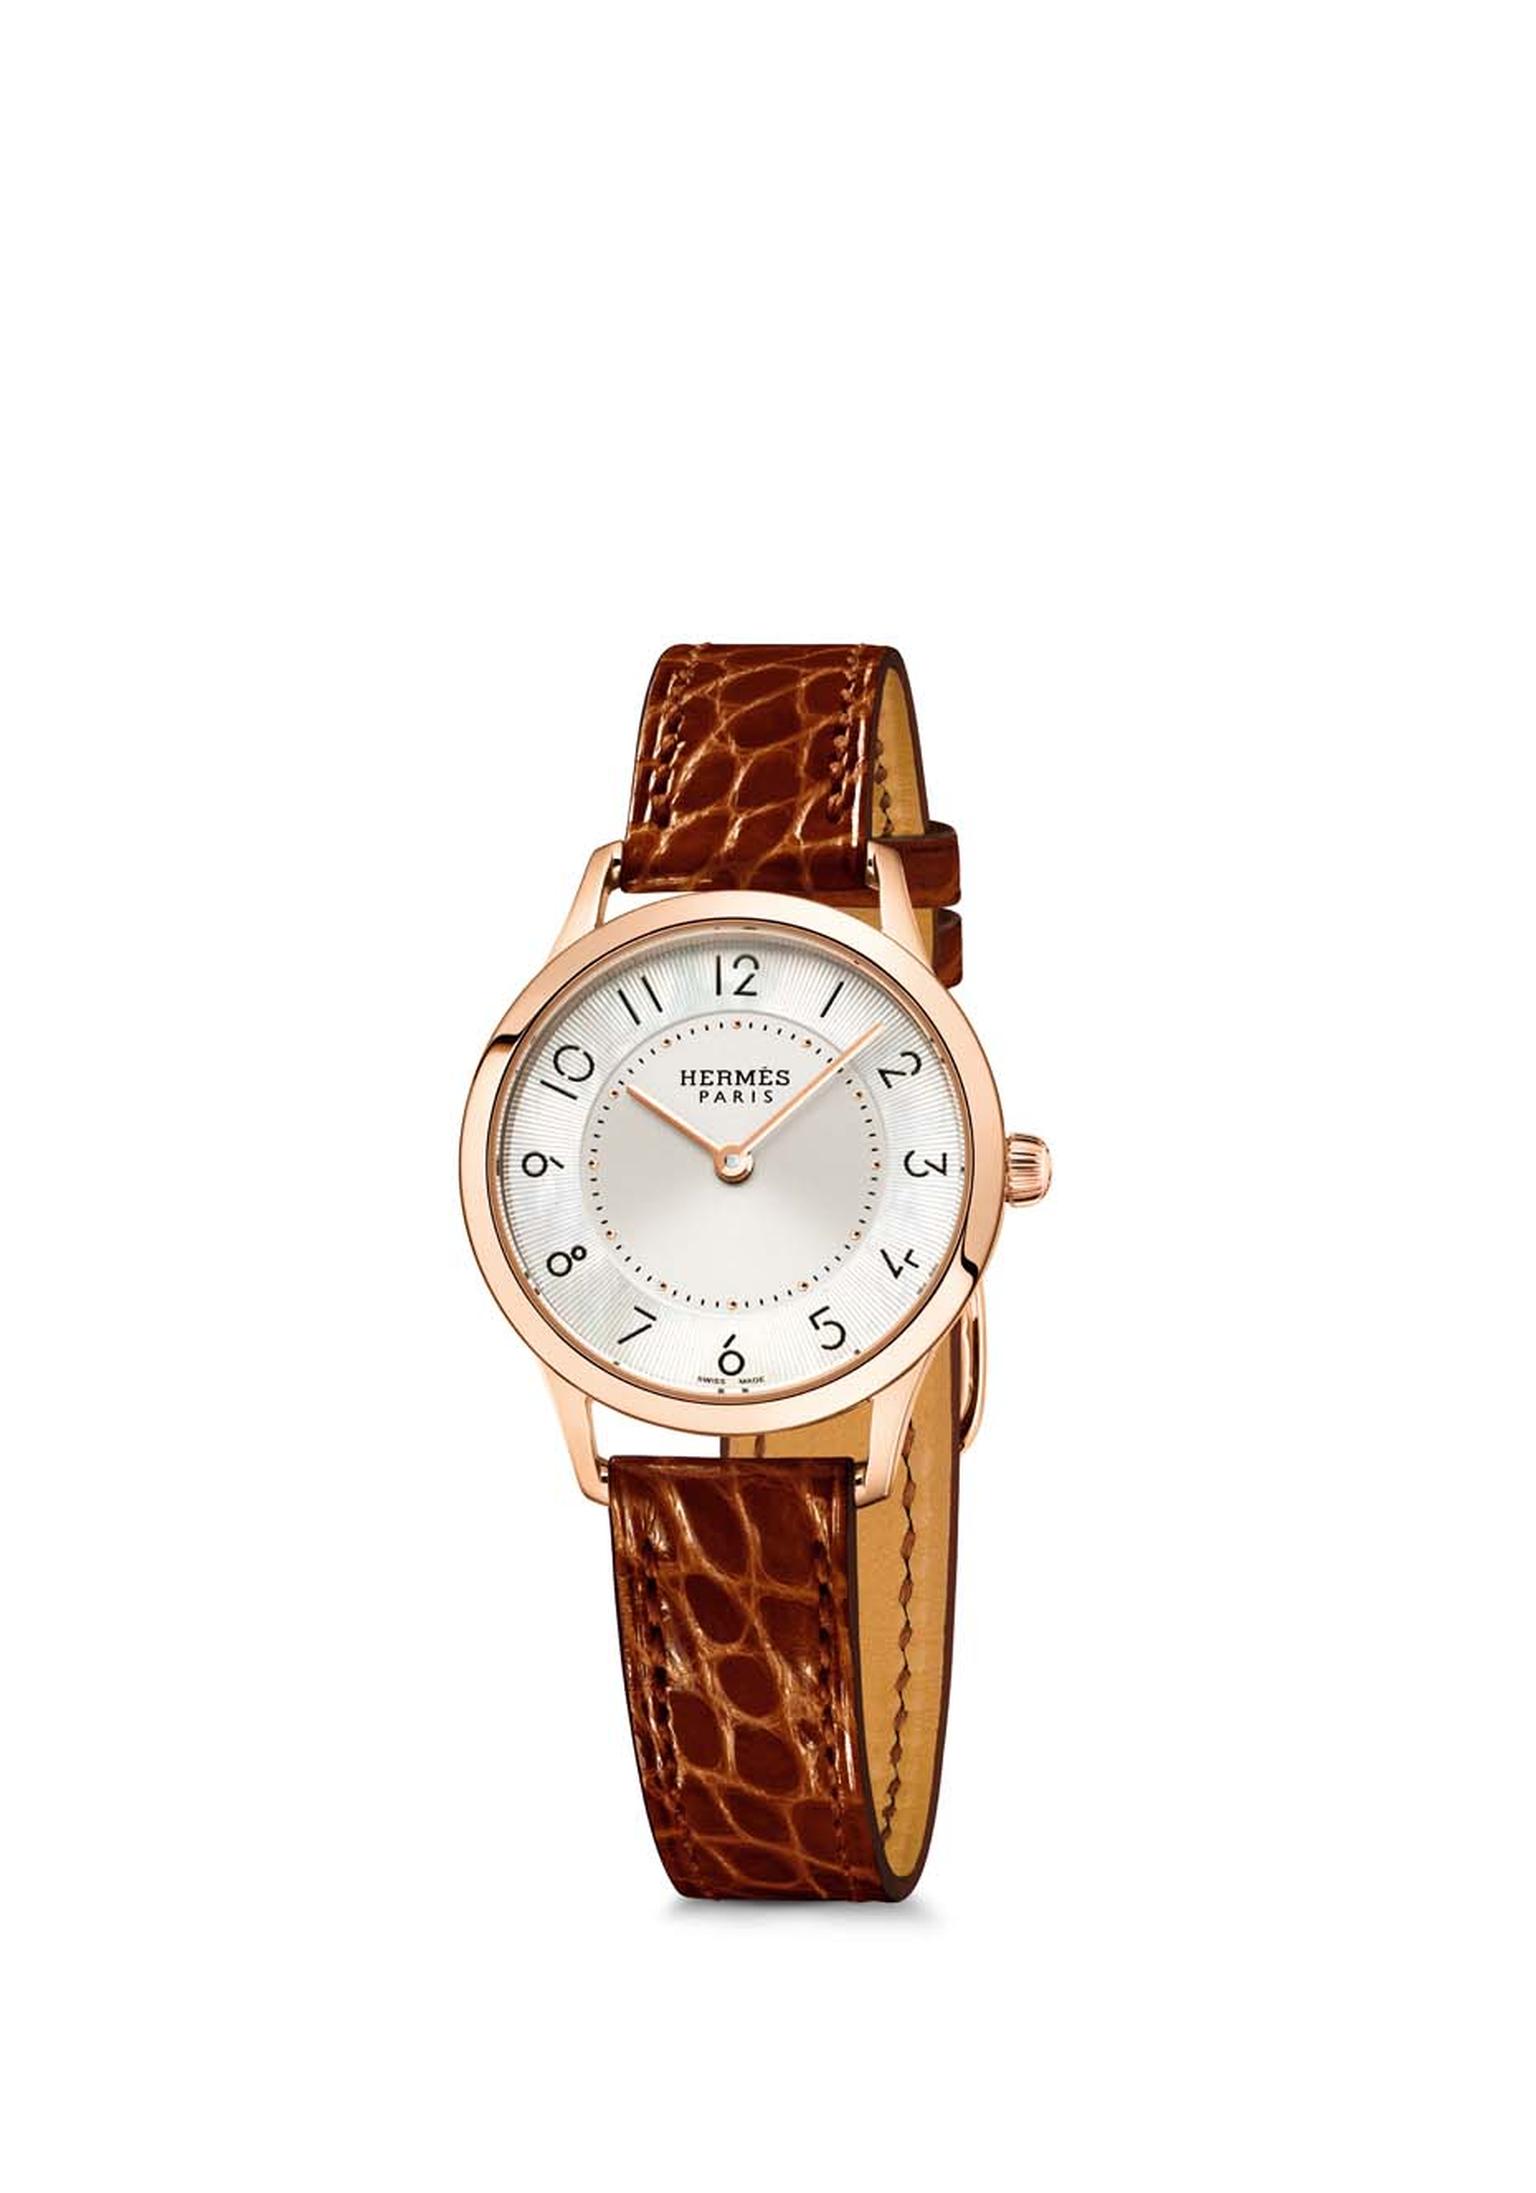 Slim d'Hermès watch in a 25mm rose gold case, also available with a diamond-set bezel. The 25mm model has a Swiss quartz movement.